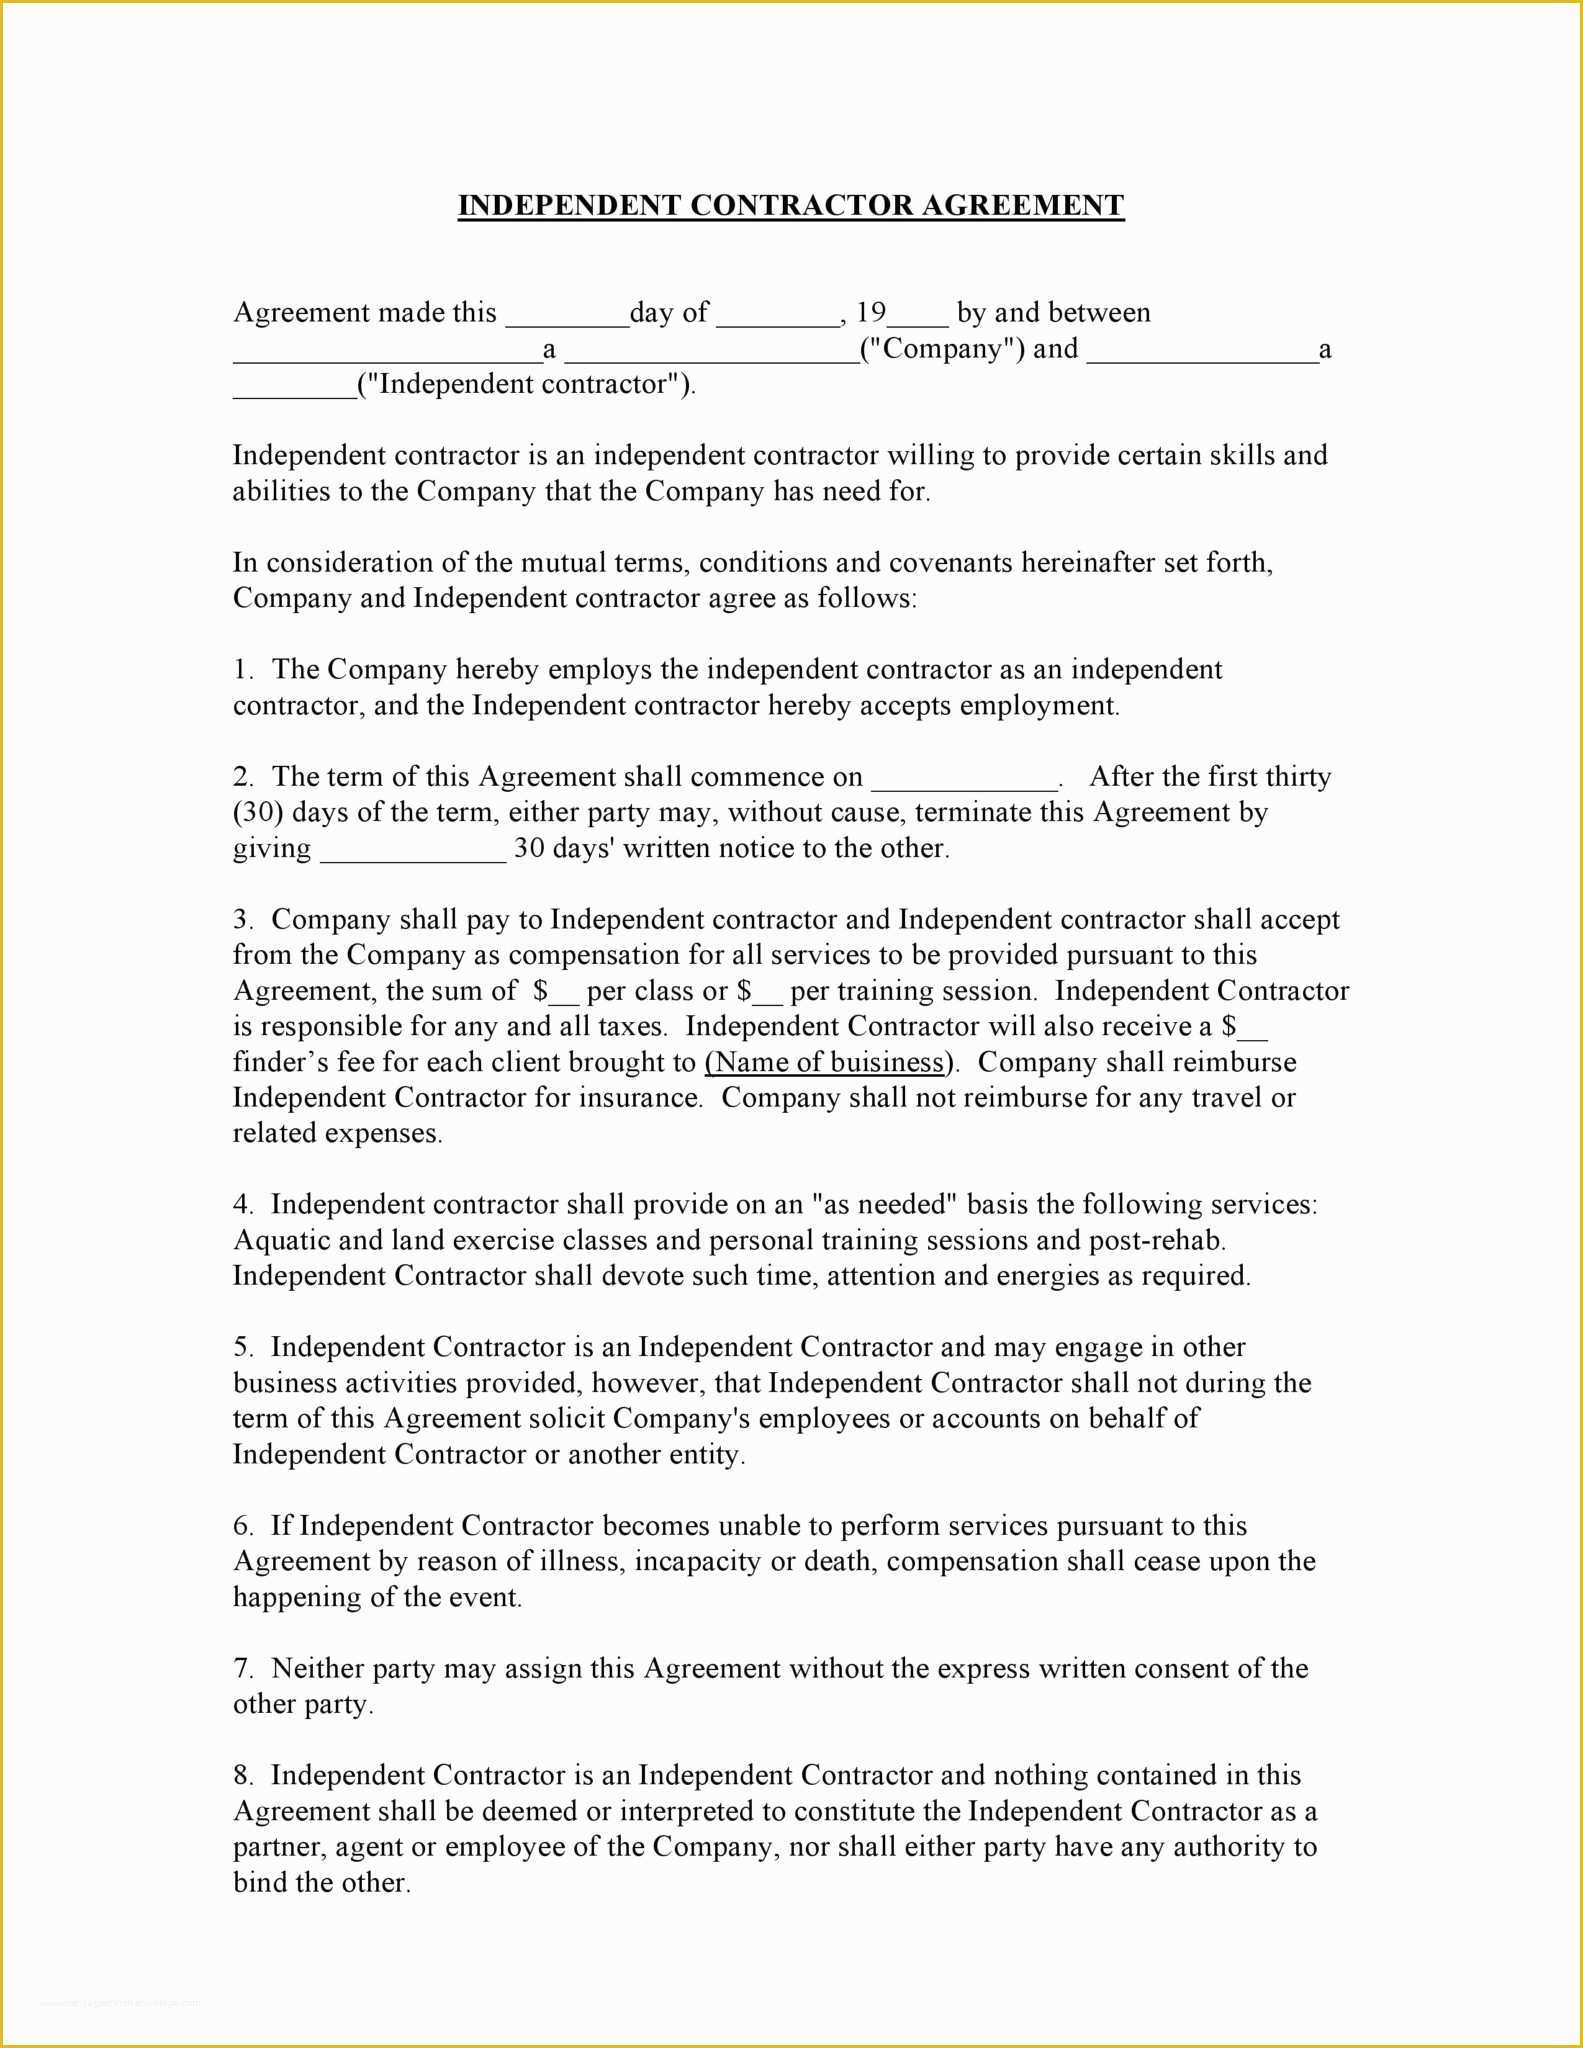 Terms Of Use Agreement Template Free Of Free Printable Independent Contractor Agreement